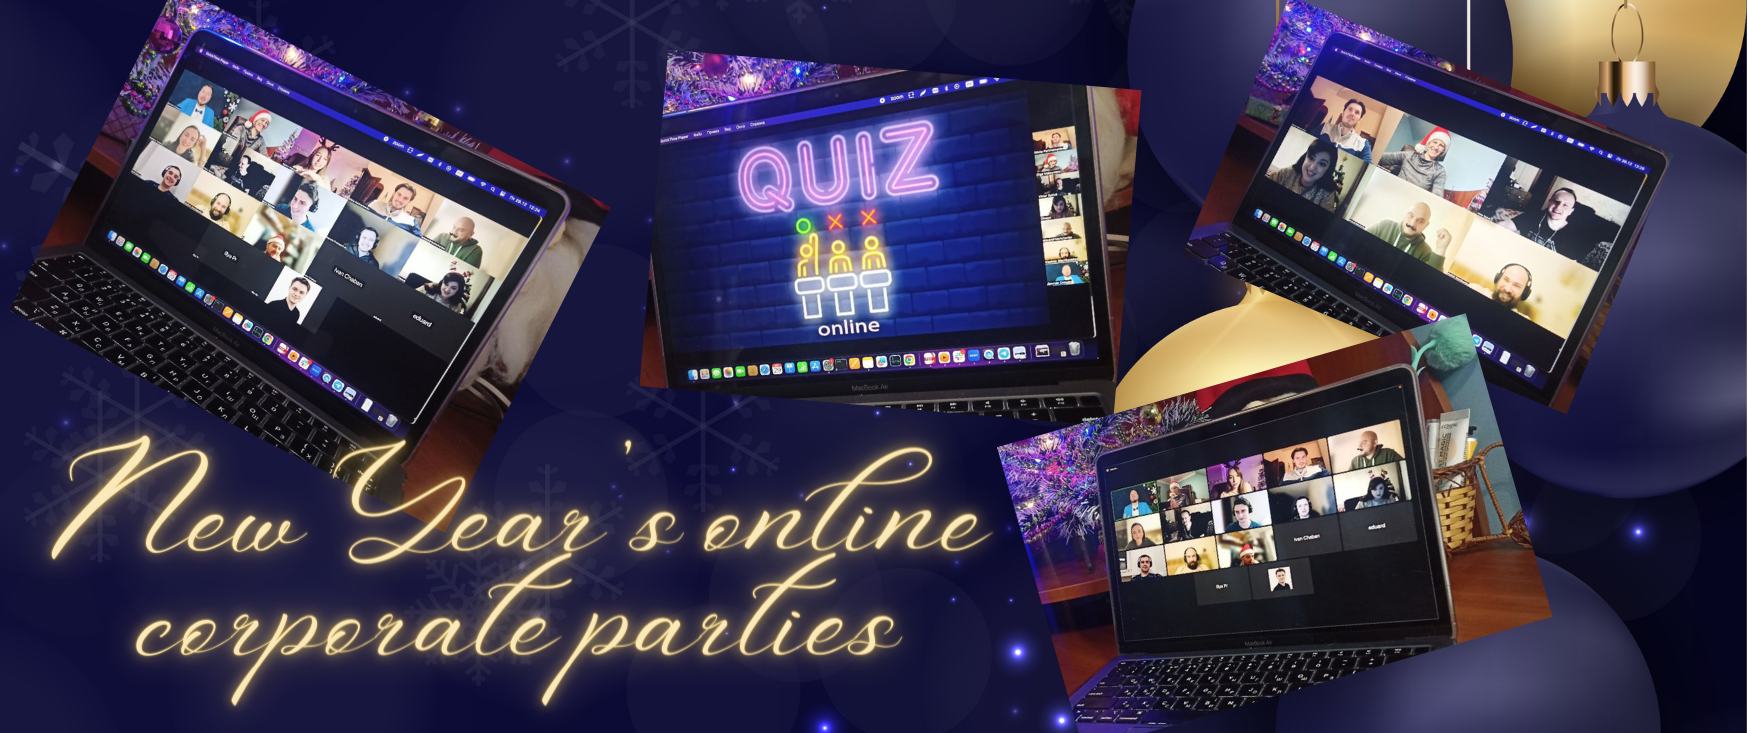 New Year's online corporate parties